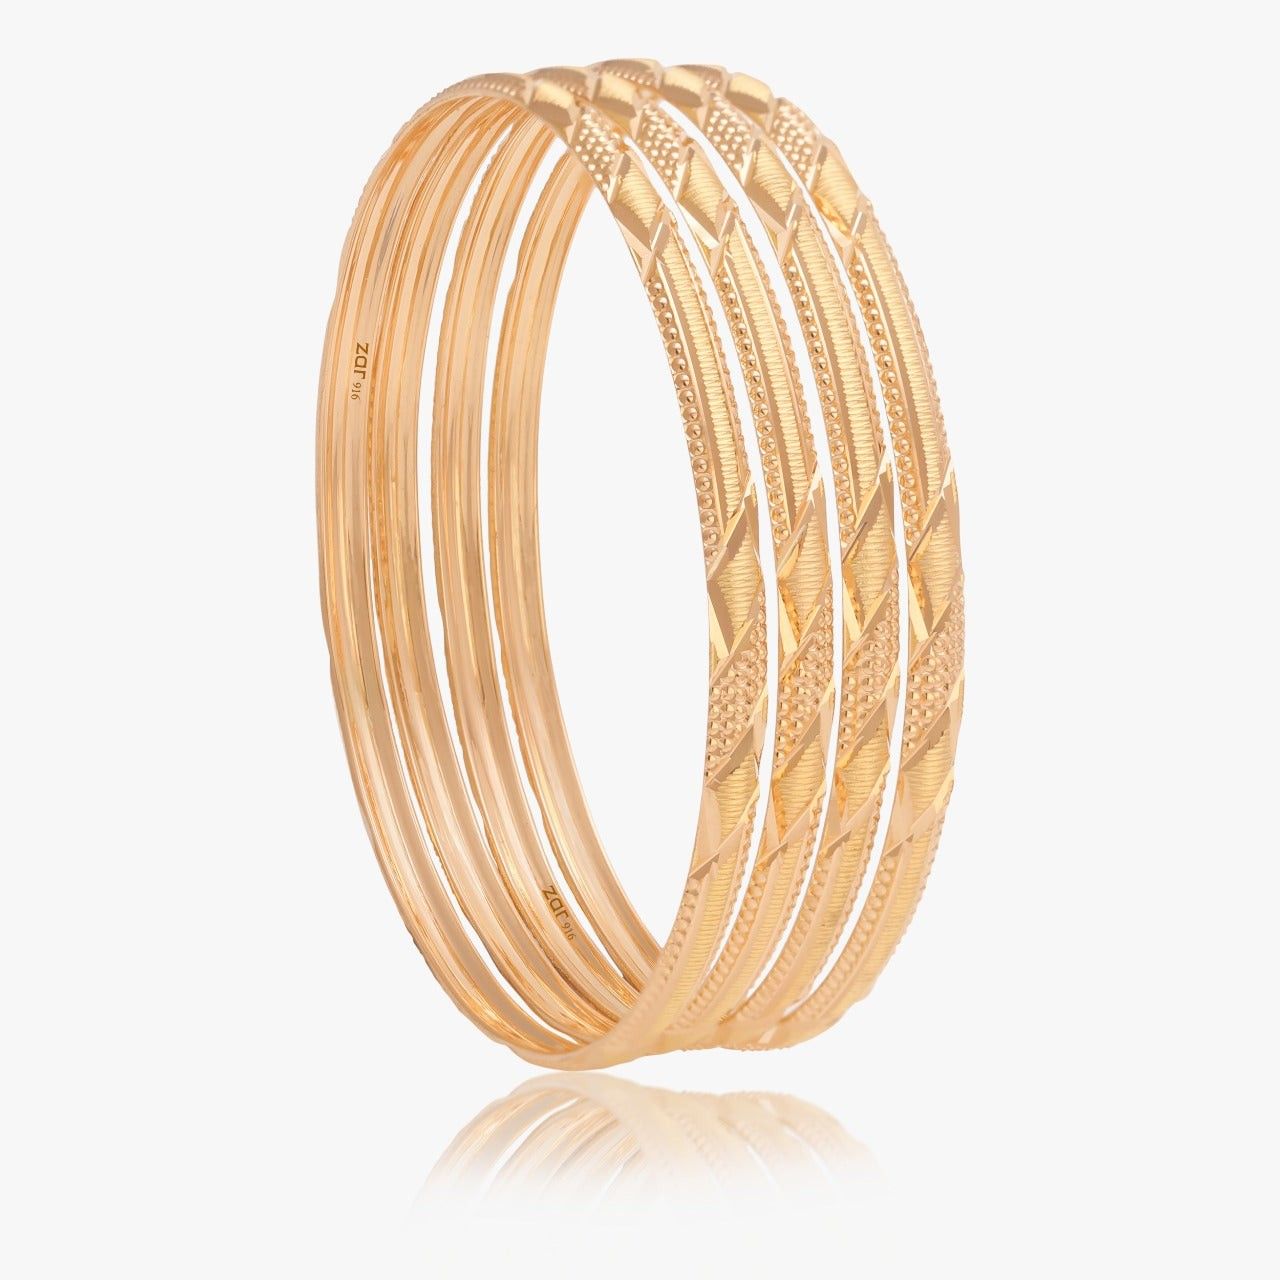 Exquisite 22 Carat Gold Bangles for Traditional Charm